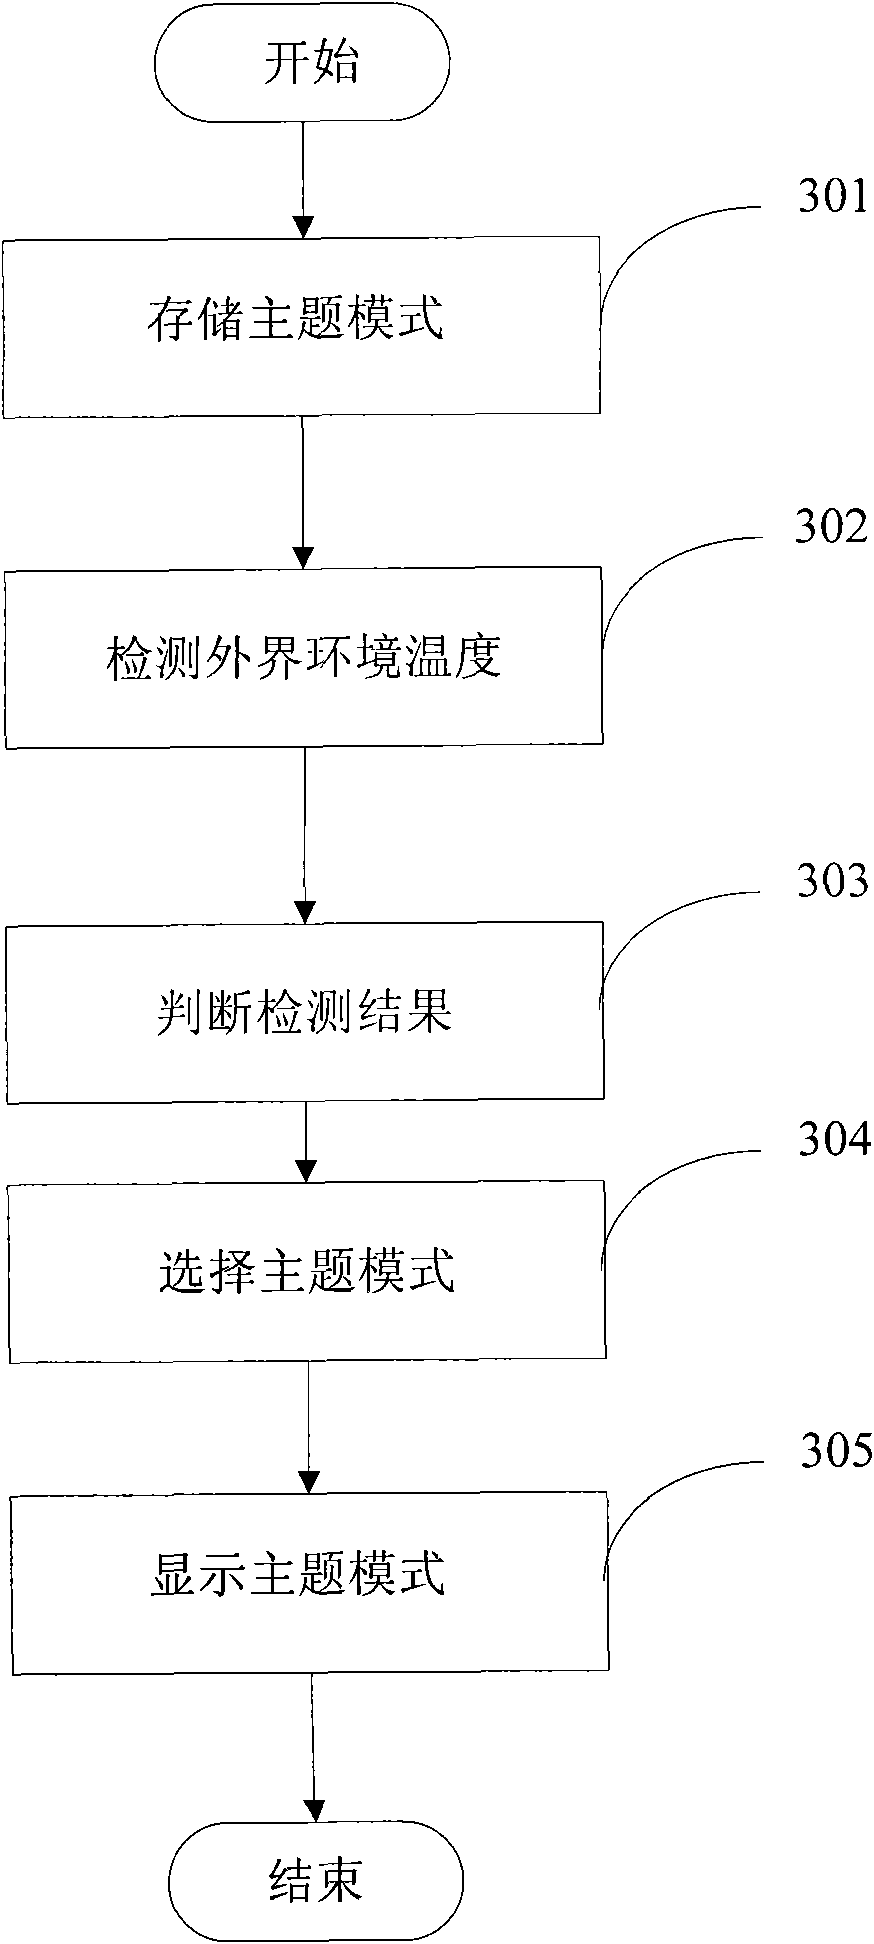 Mobile terminal and method for automatically updating subject mode